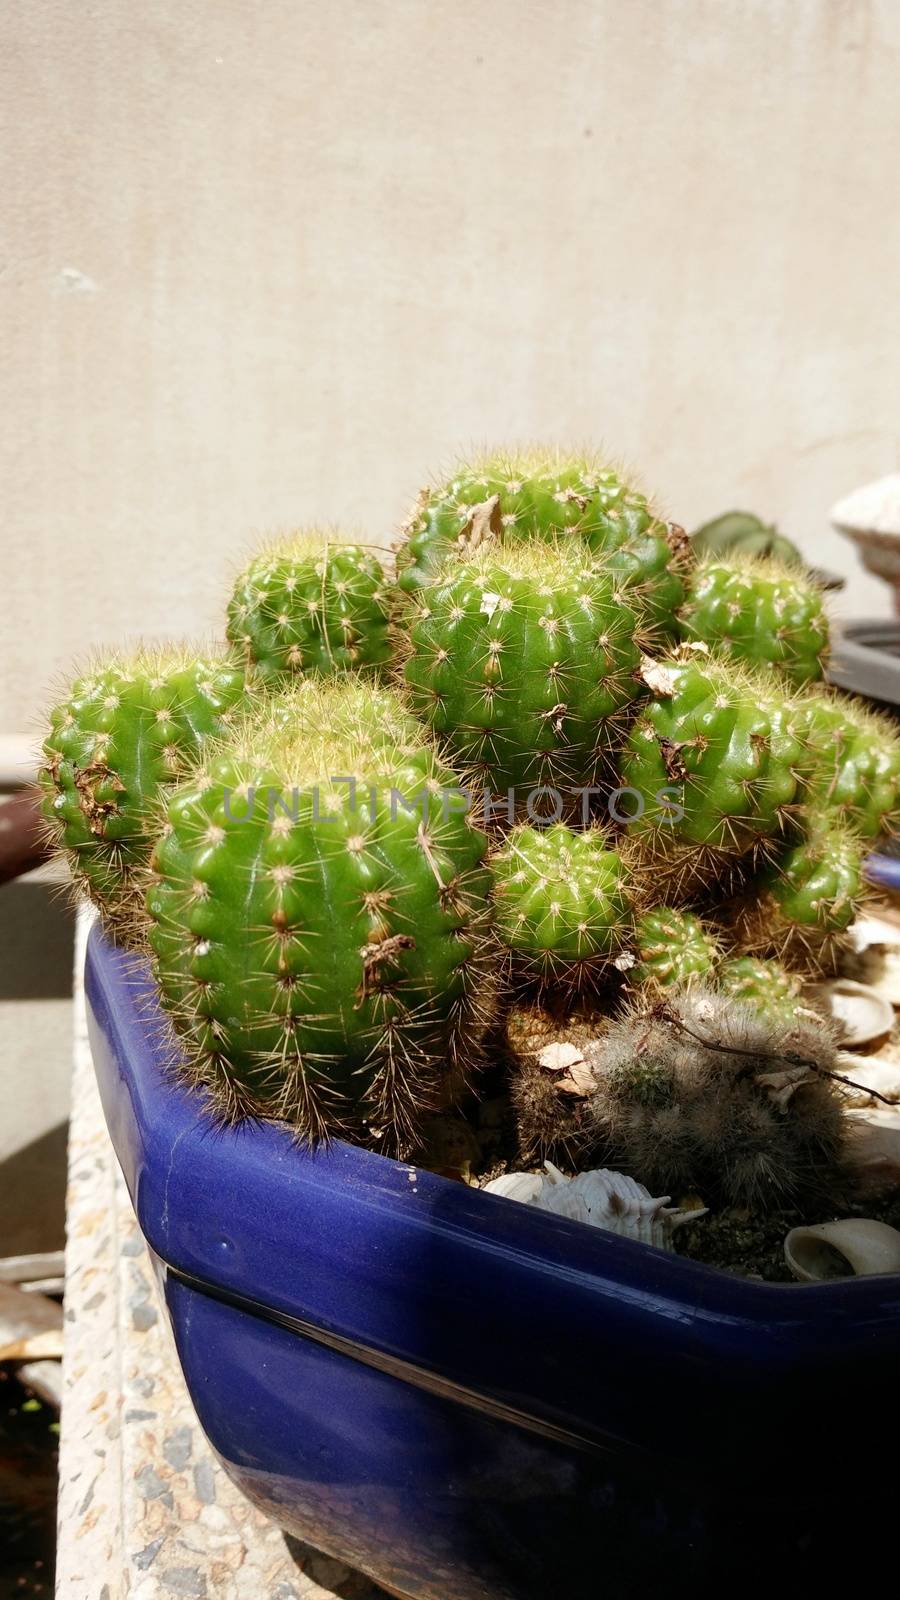 Close-up of the Cactus in the Blue Jardiniere